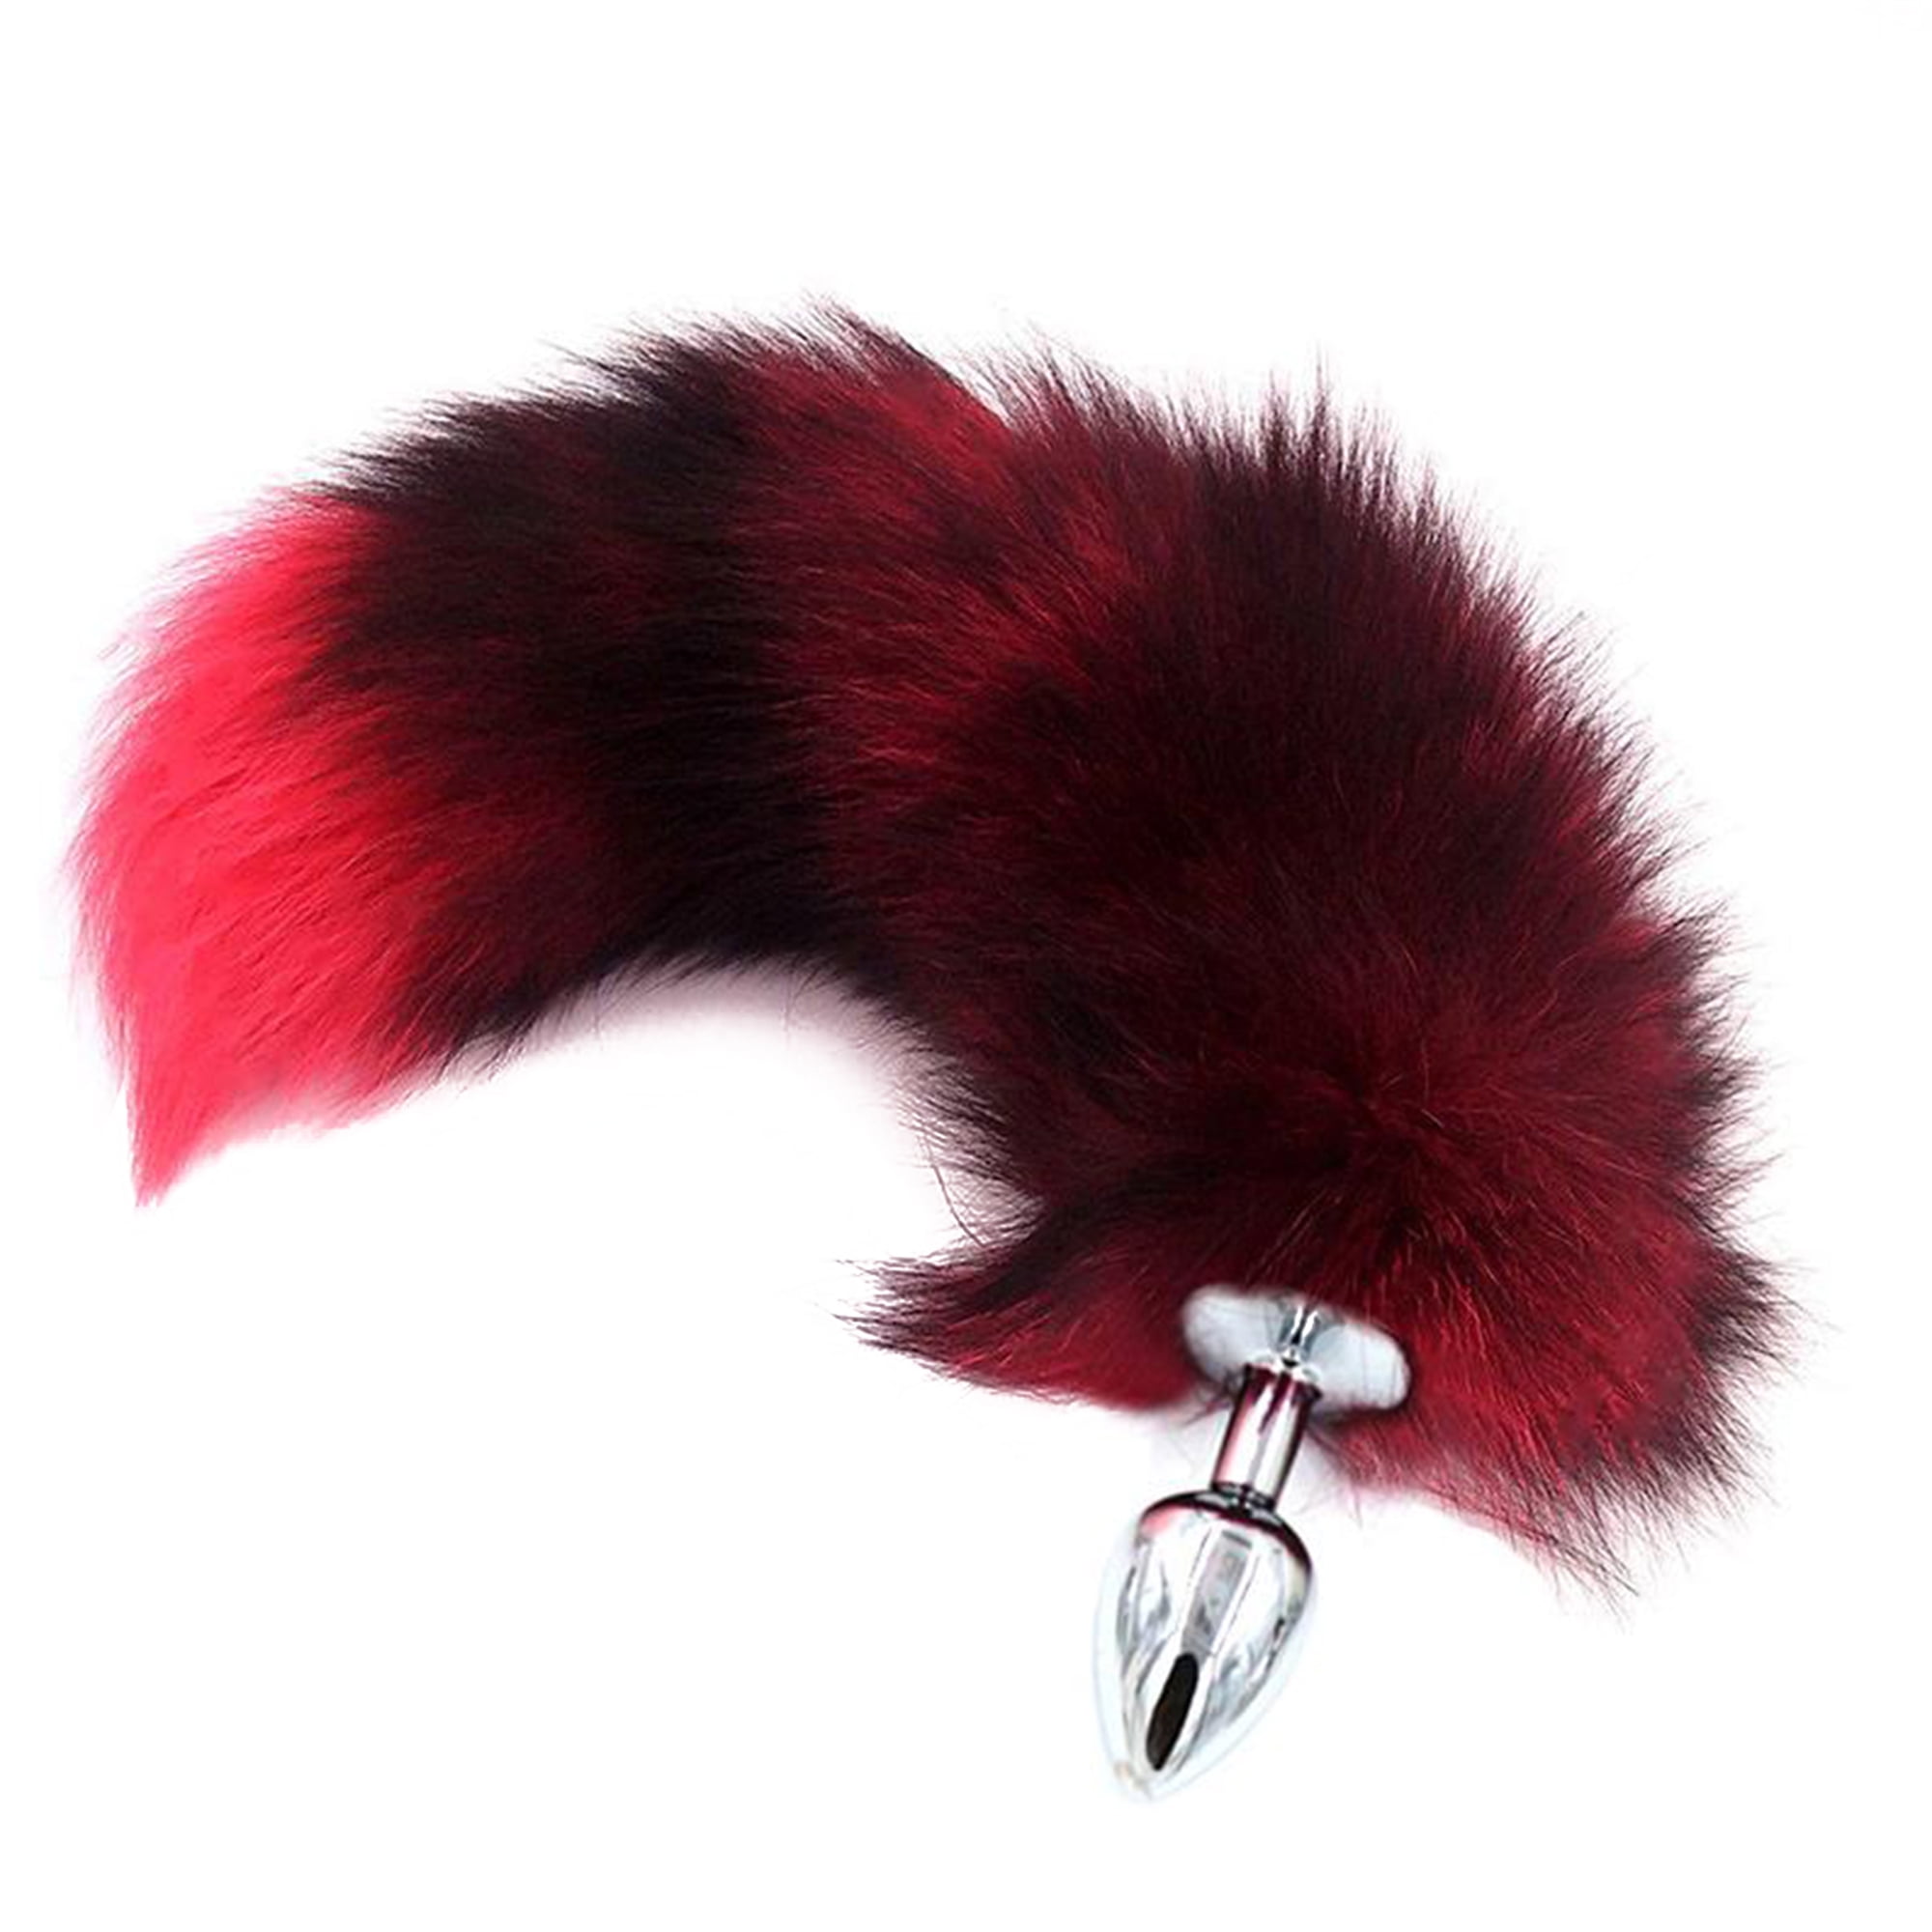 Stylish Furry Fuzzy XI Pink Handcuffs Soft Metal Adult Night Party Game cosplay 